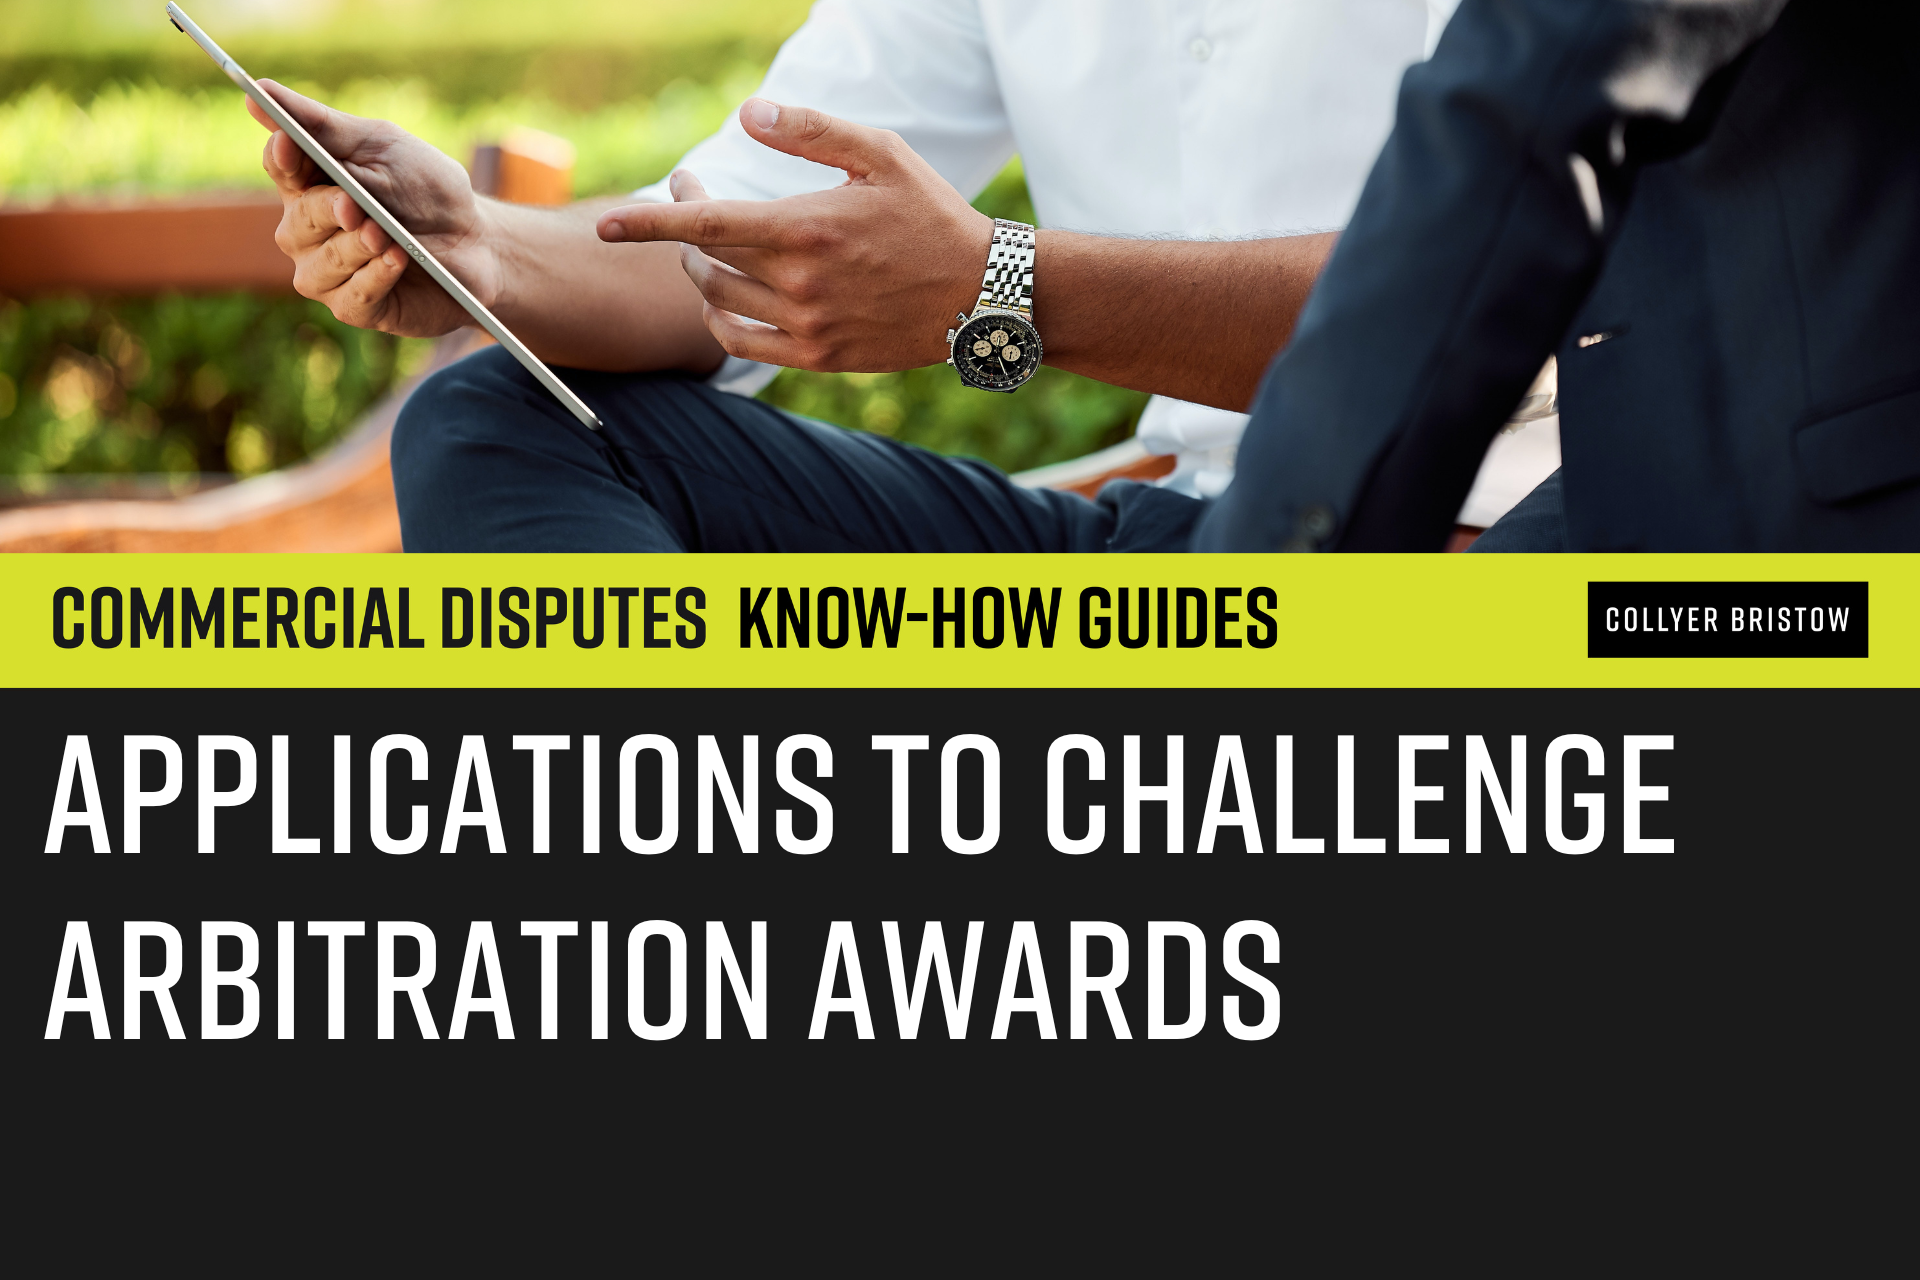 Applications to challenge arbitration awards